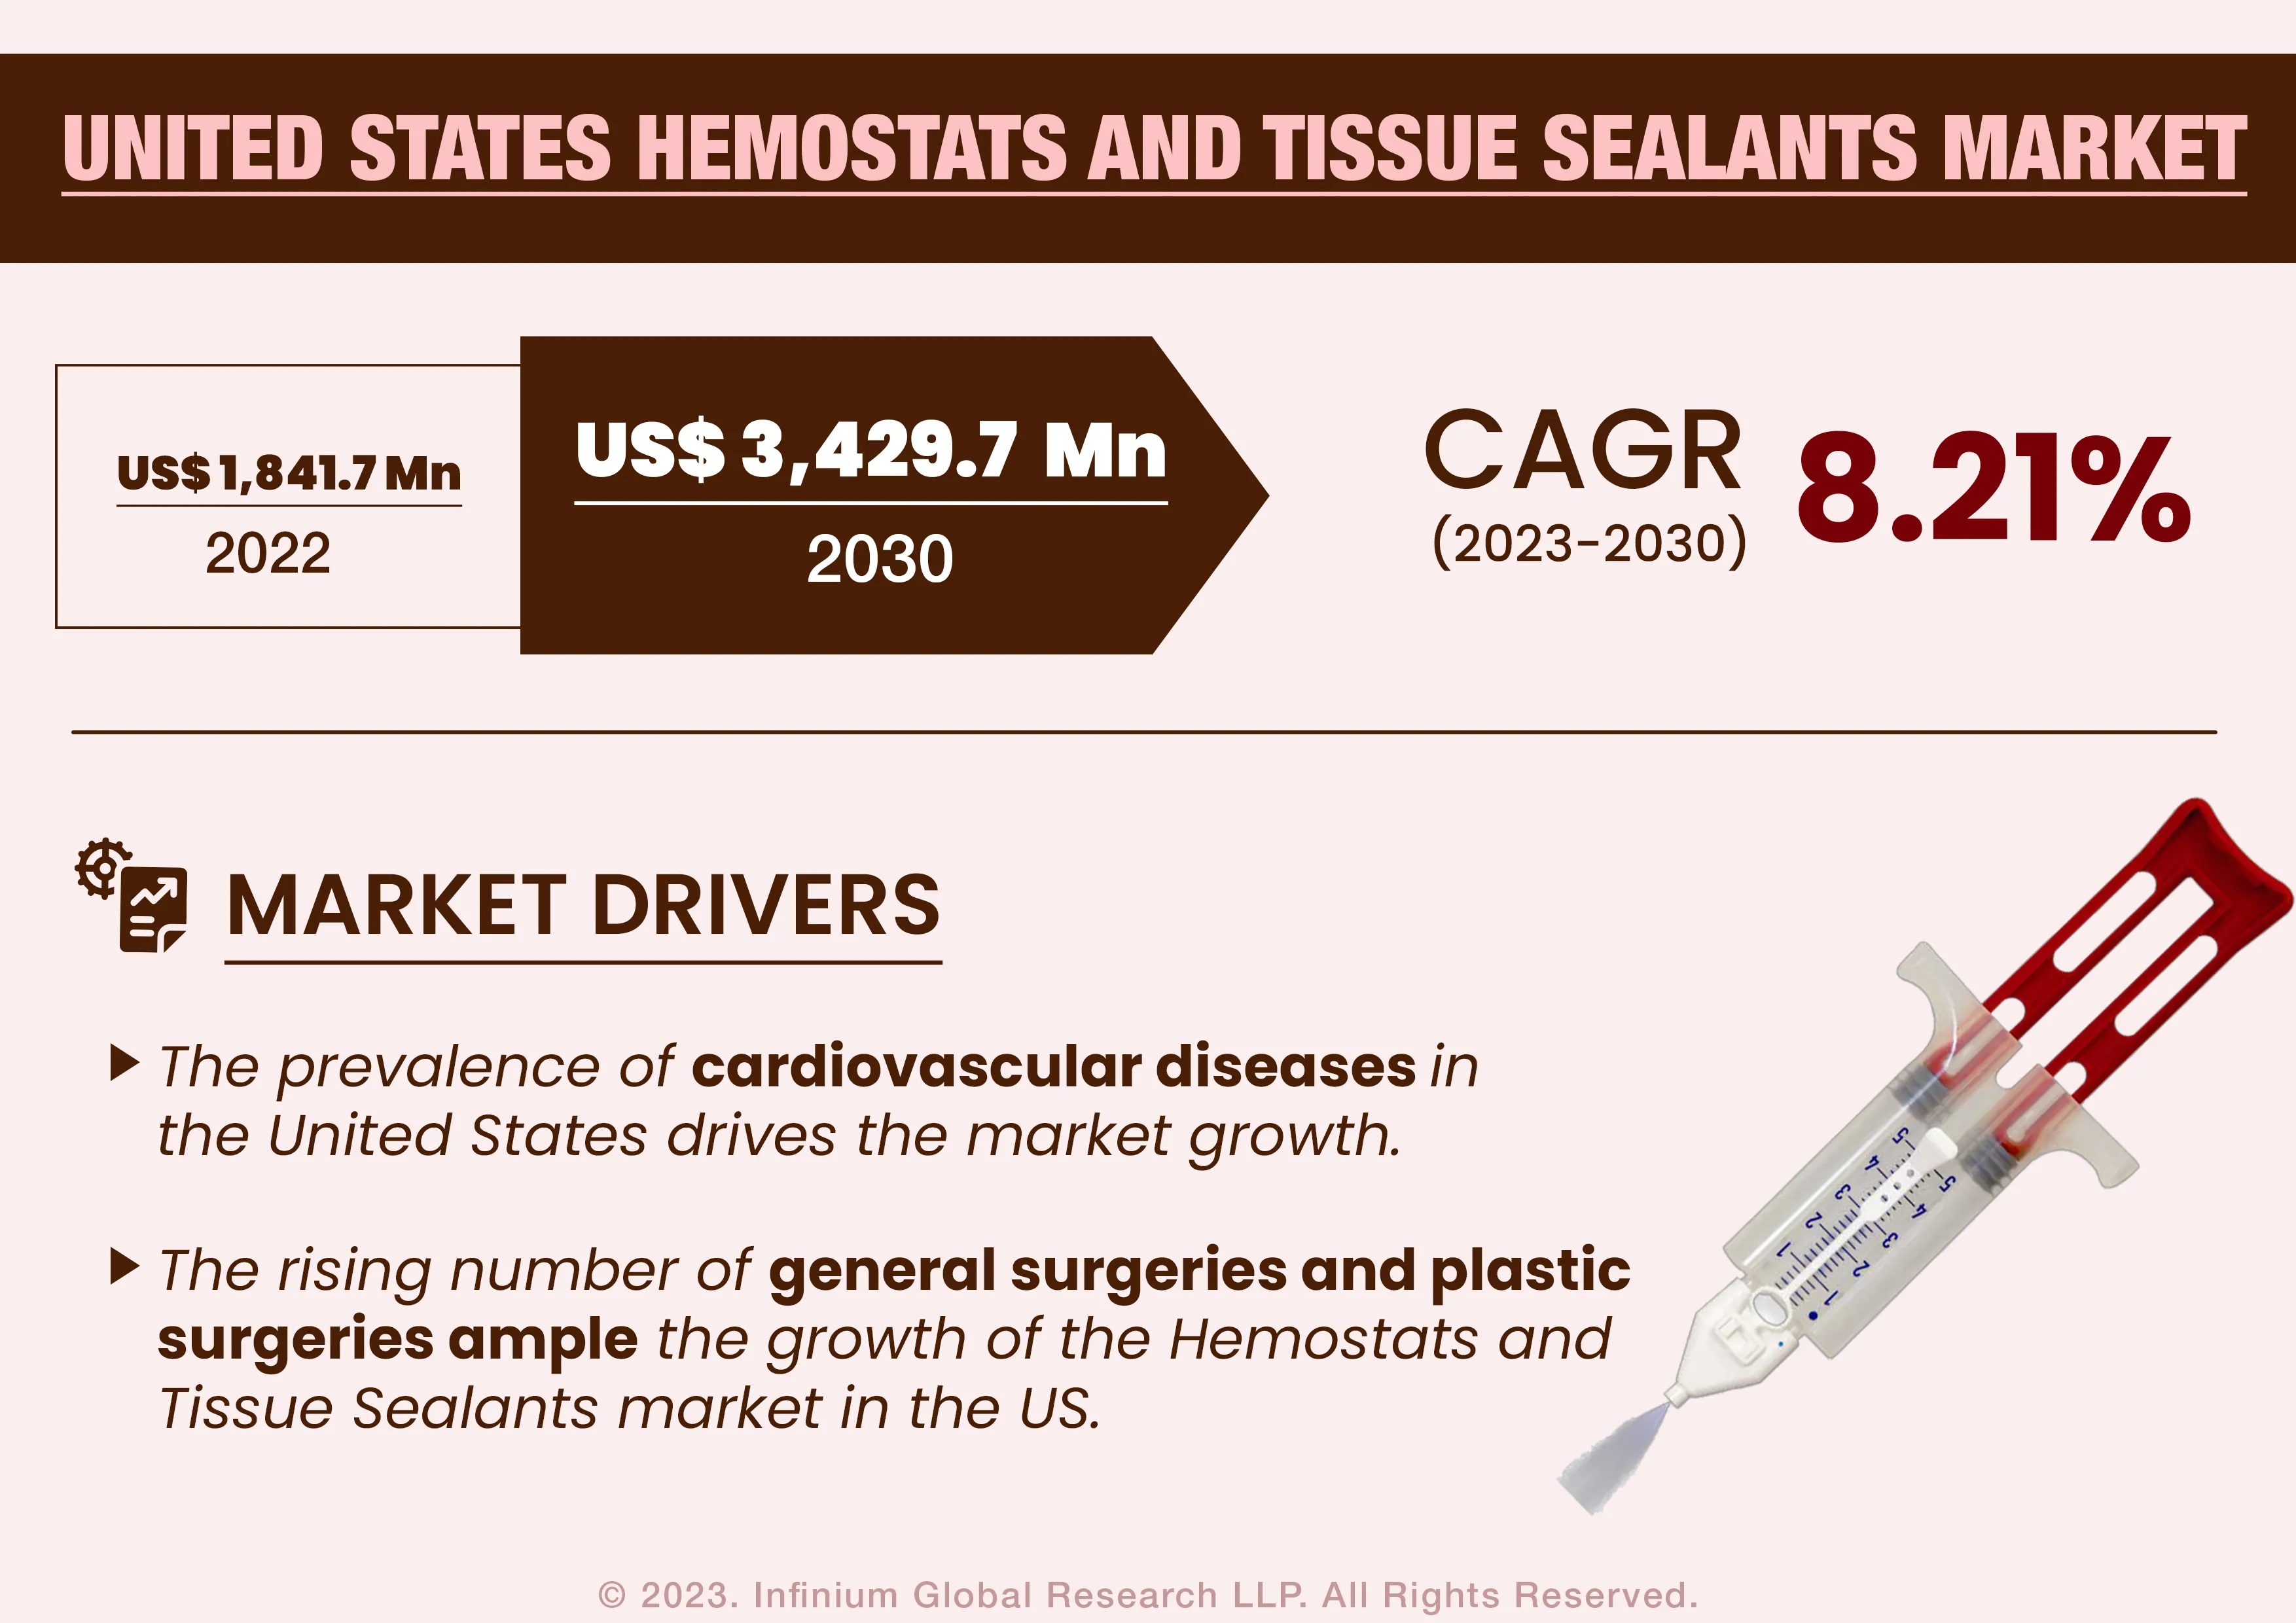 United States Hemostats and Tissue Sealants Market was Valued at USD 1,841.7 Million in 2022 and is Expected to Reach USD 3,429.7 Million by 2030 and Grow at a CAGR of 8.21% Over the Forecast Period.